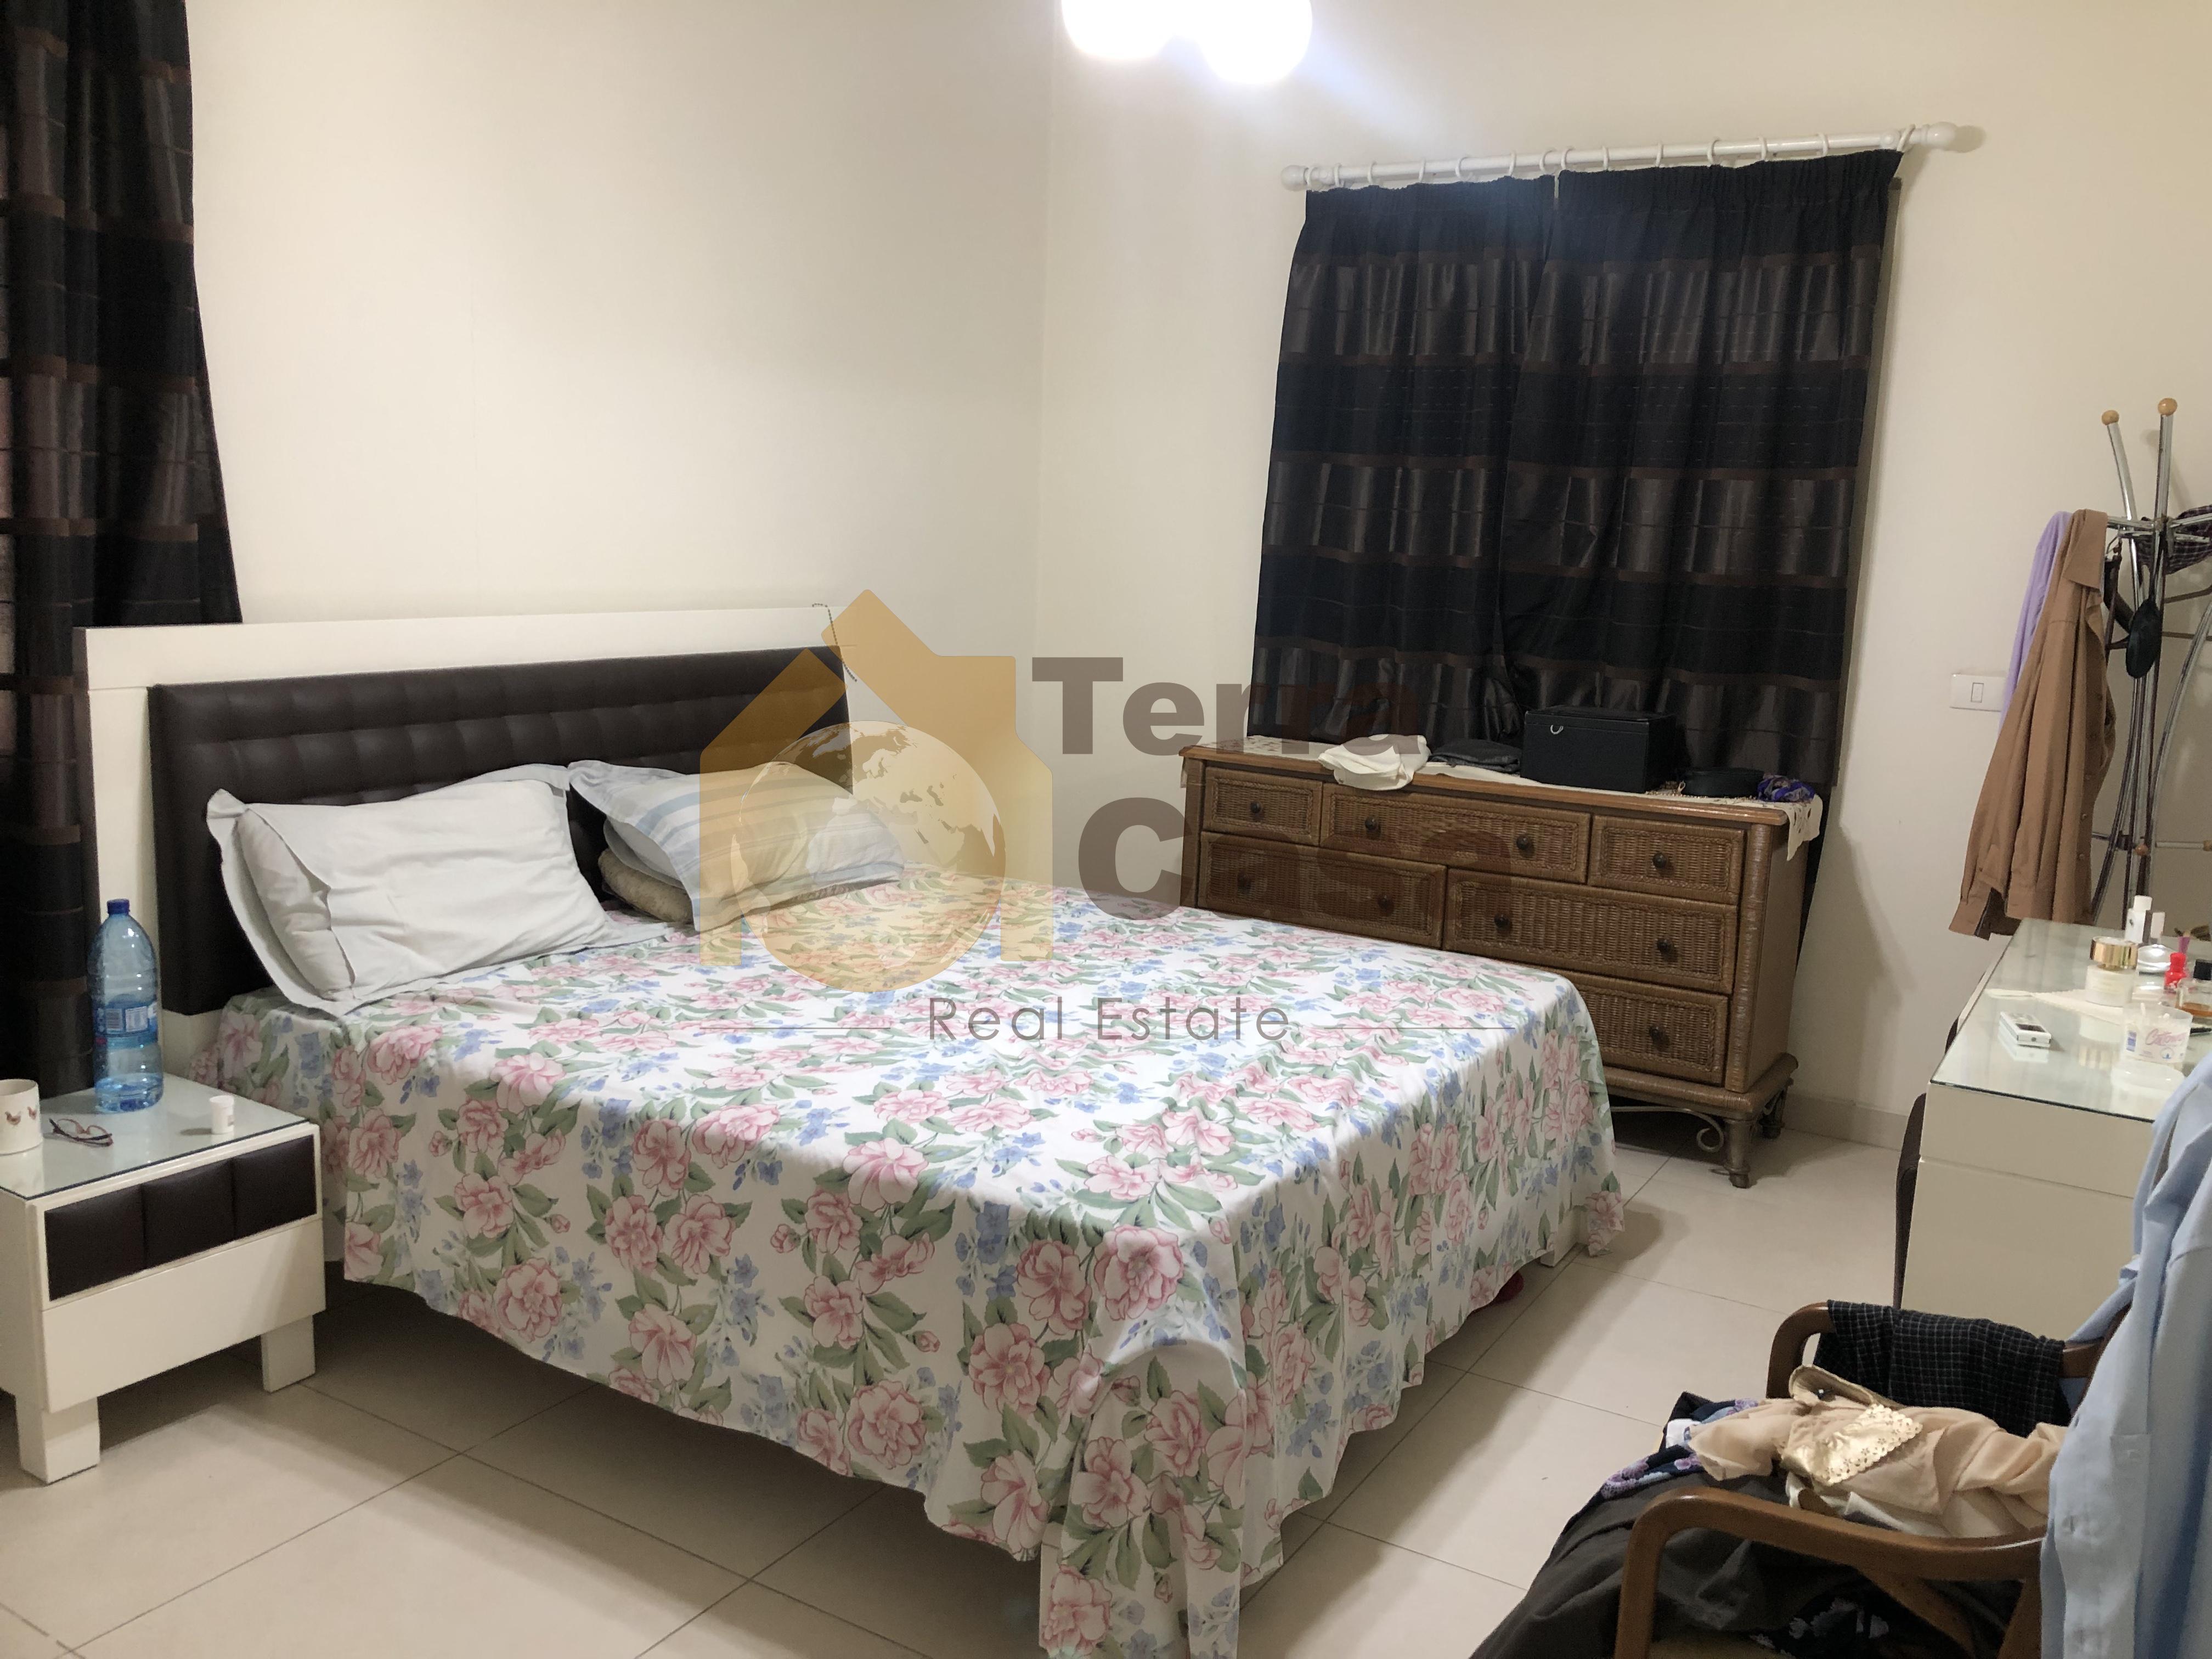 Fully furnished apartment in sin el fil , prime location, 22/24 hour electricity